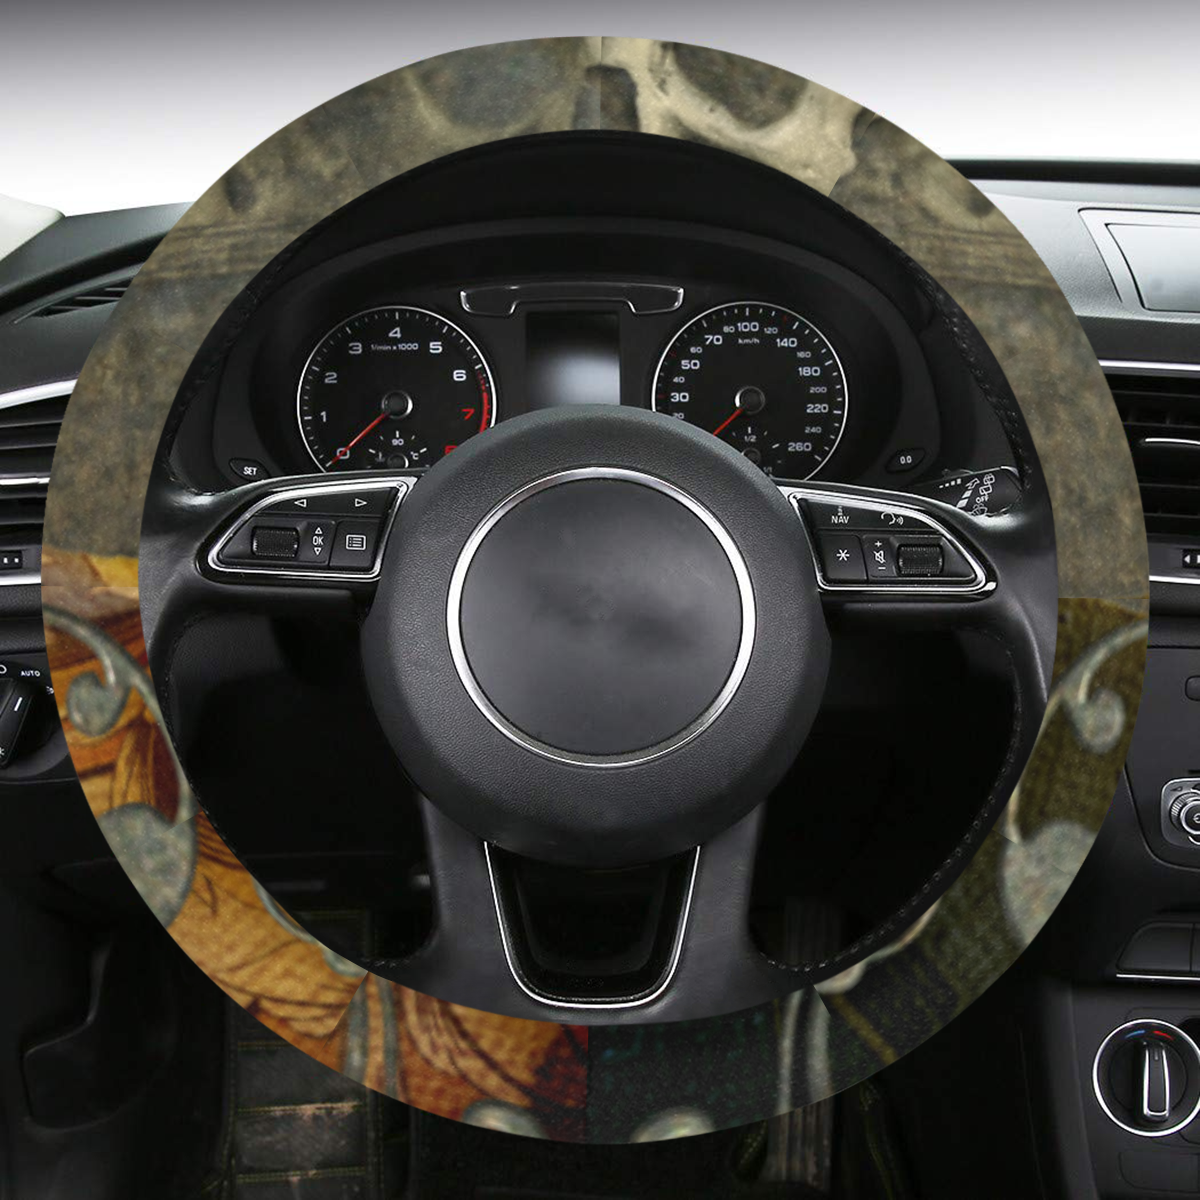 Awesome creepy skulls Steering Wheel Cover with Anti-Slip Insert